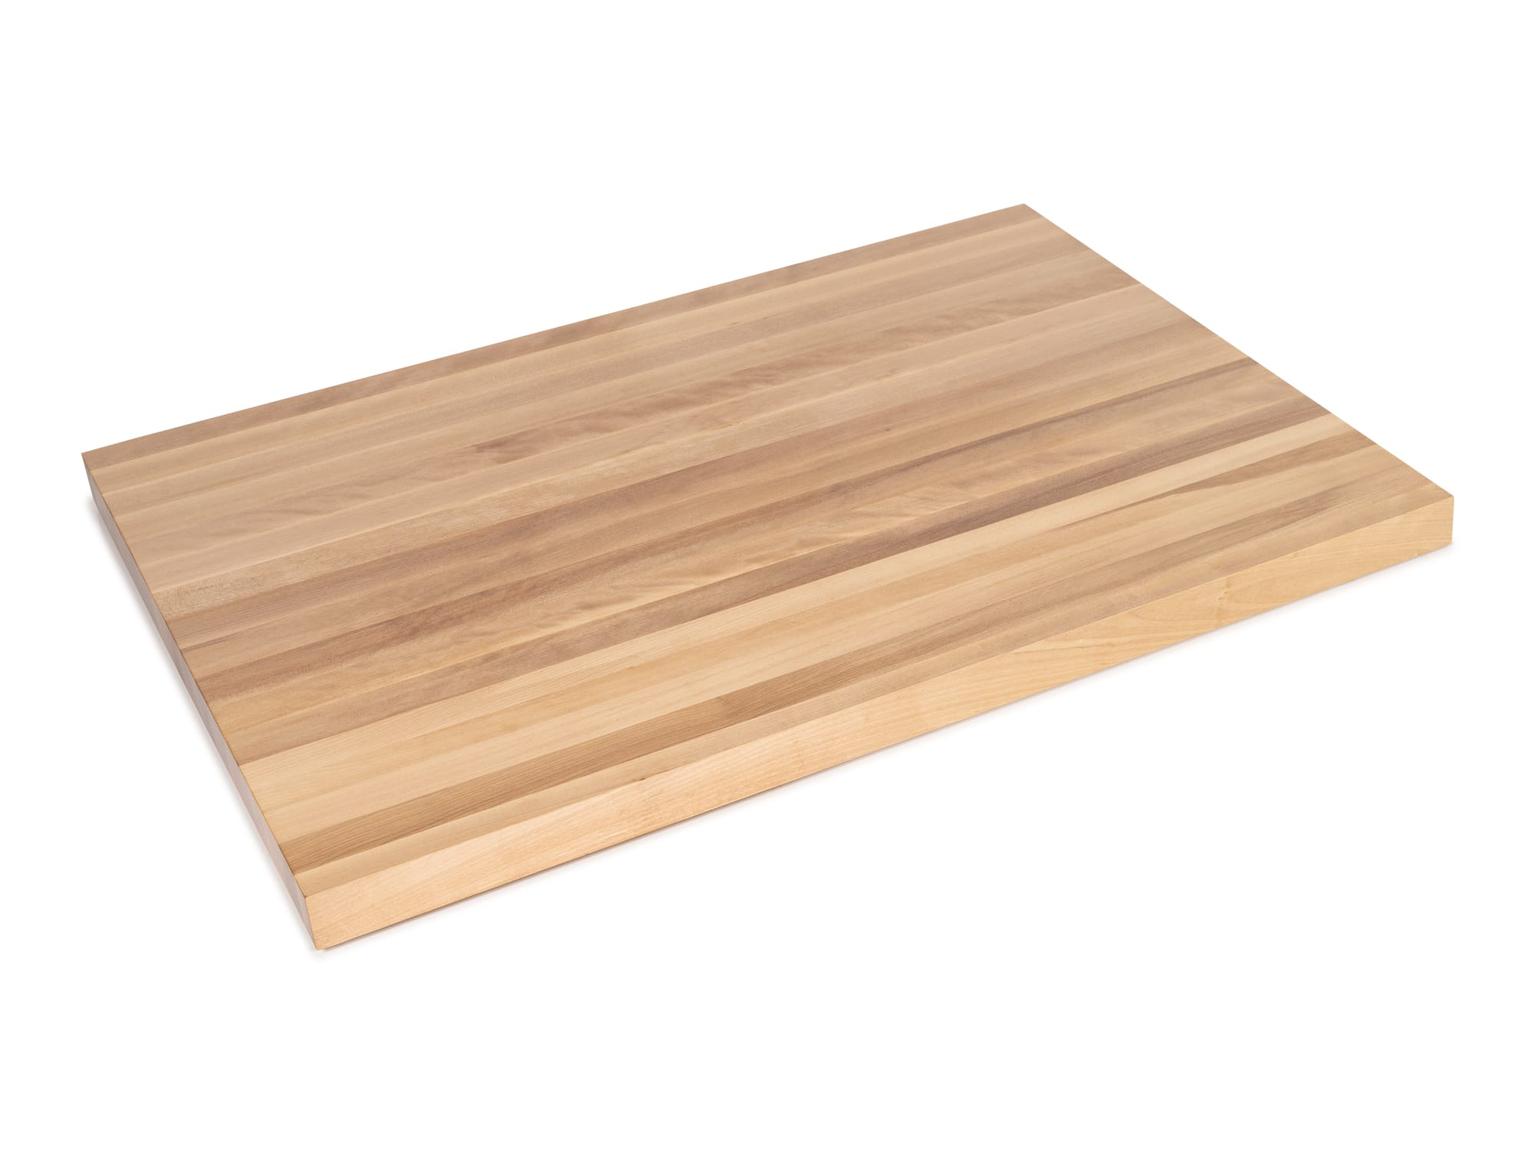 Laminated Wood Cabinet Tops